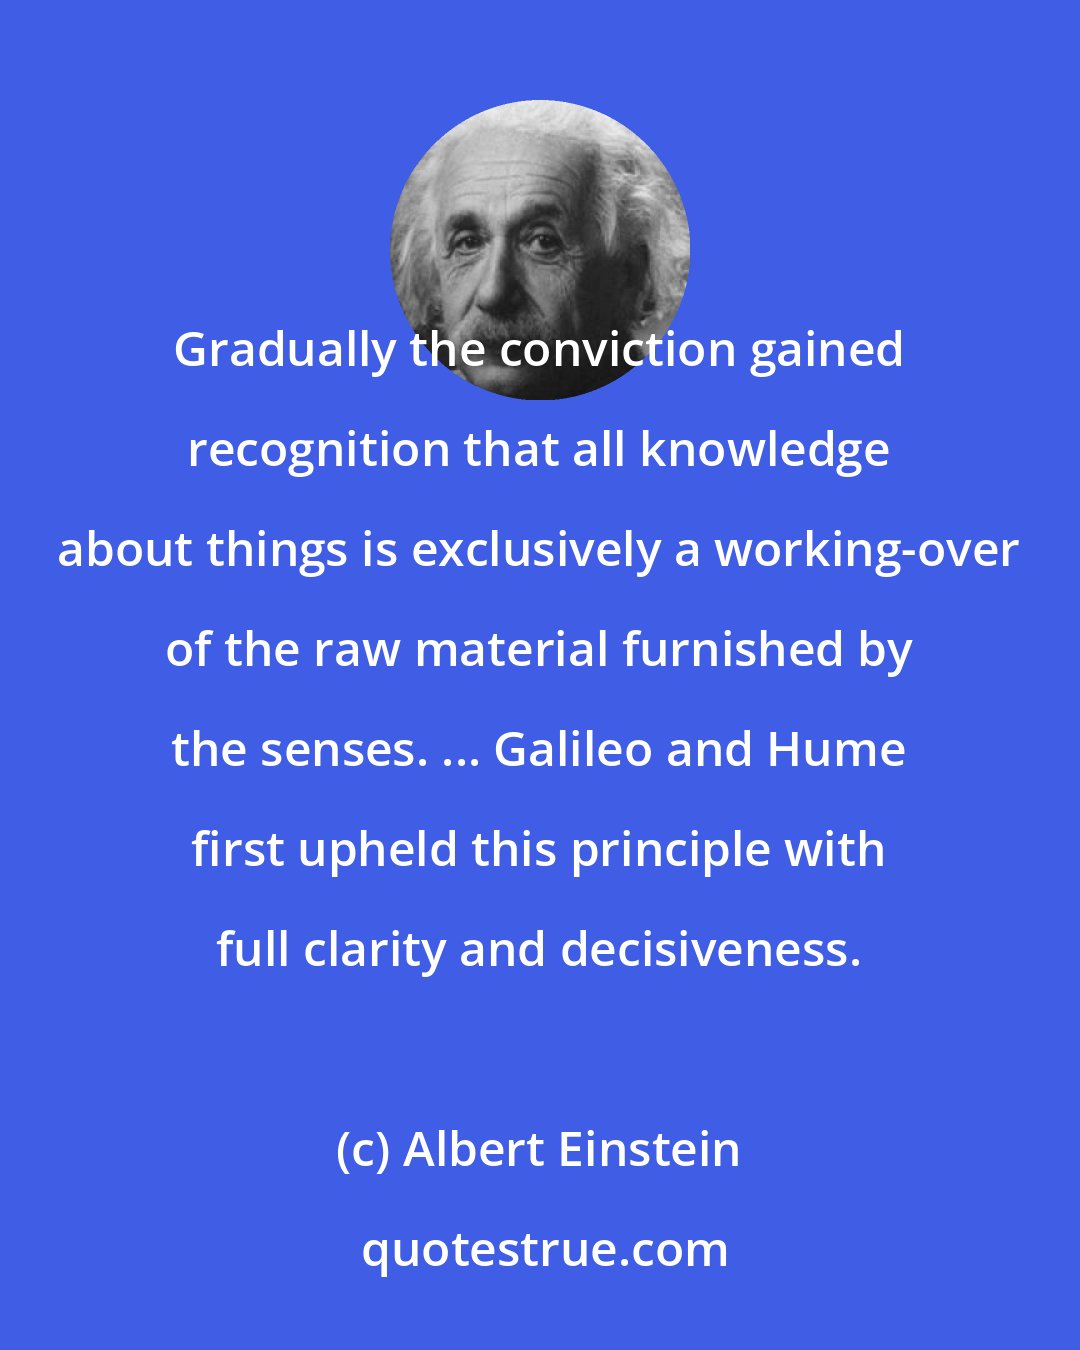 Albert Einstein: Gradually the conviction gained recognition that all knowledge about things is exclusively a working-over of the raw material furnished by the senses. ... Galileo and Hume first upheld this principle with full clarity and decisiveness.